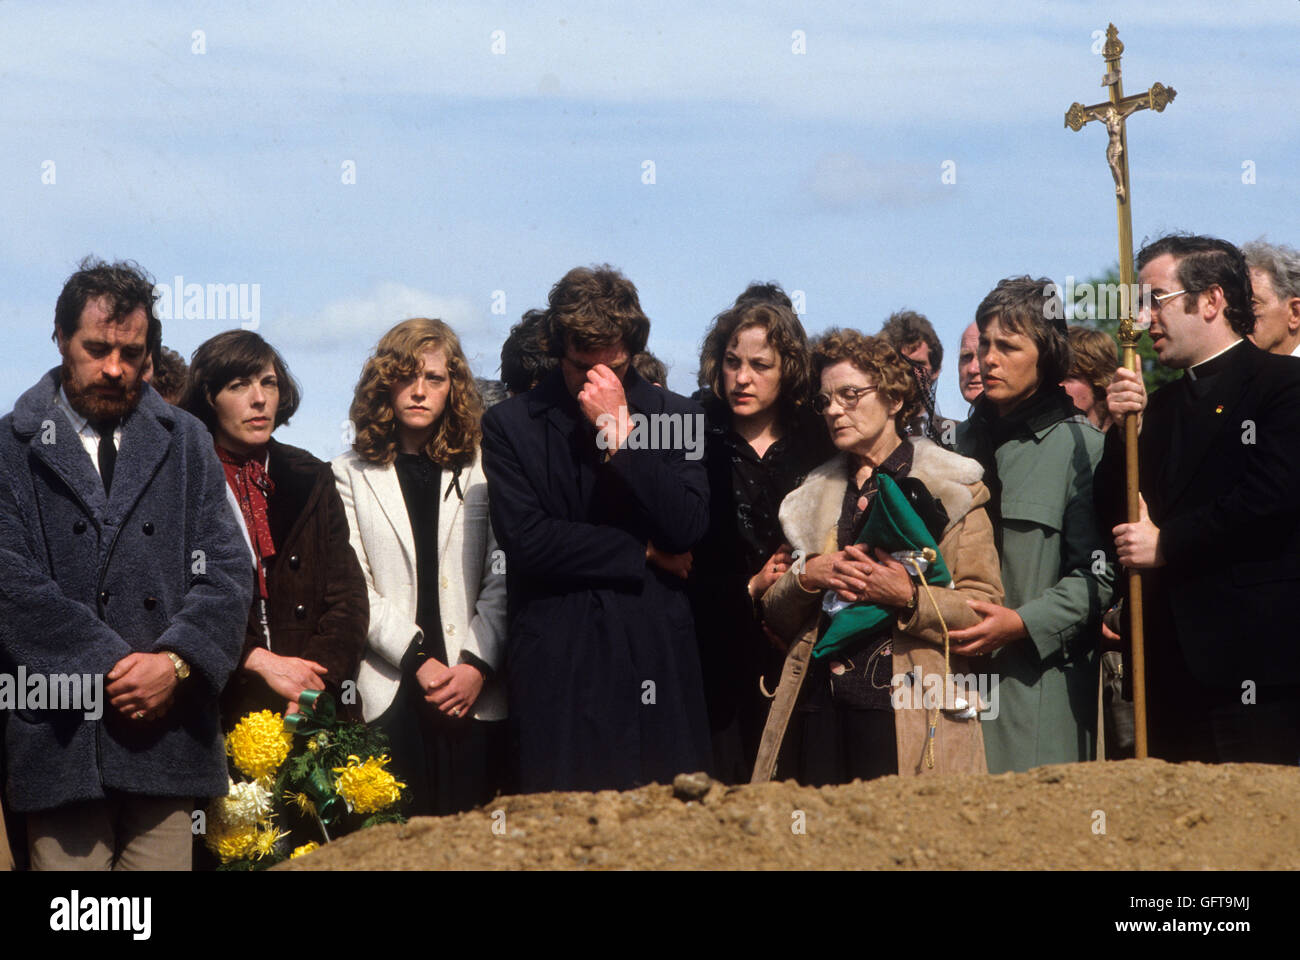 Hunger striker Francis Hughes funeral 1981 Bellaghy, in County Londonderry, Northern Ireland 1980s . HOMER SYKES Stock Photo